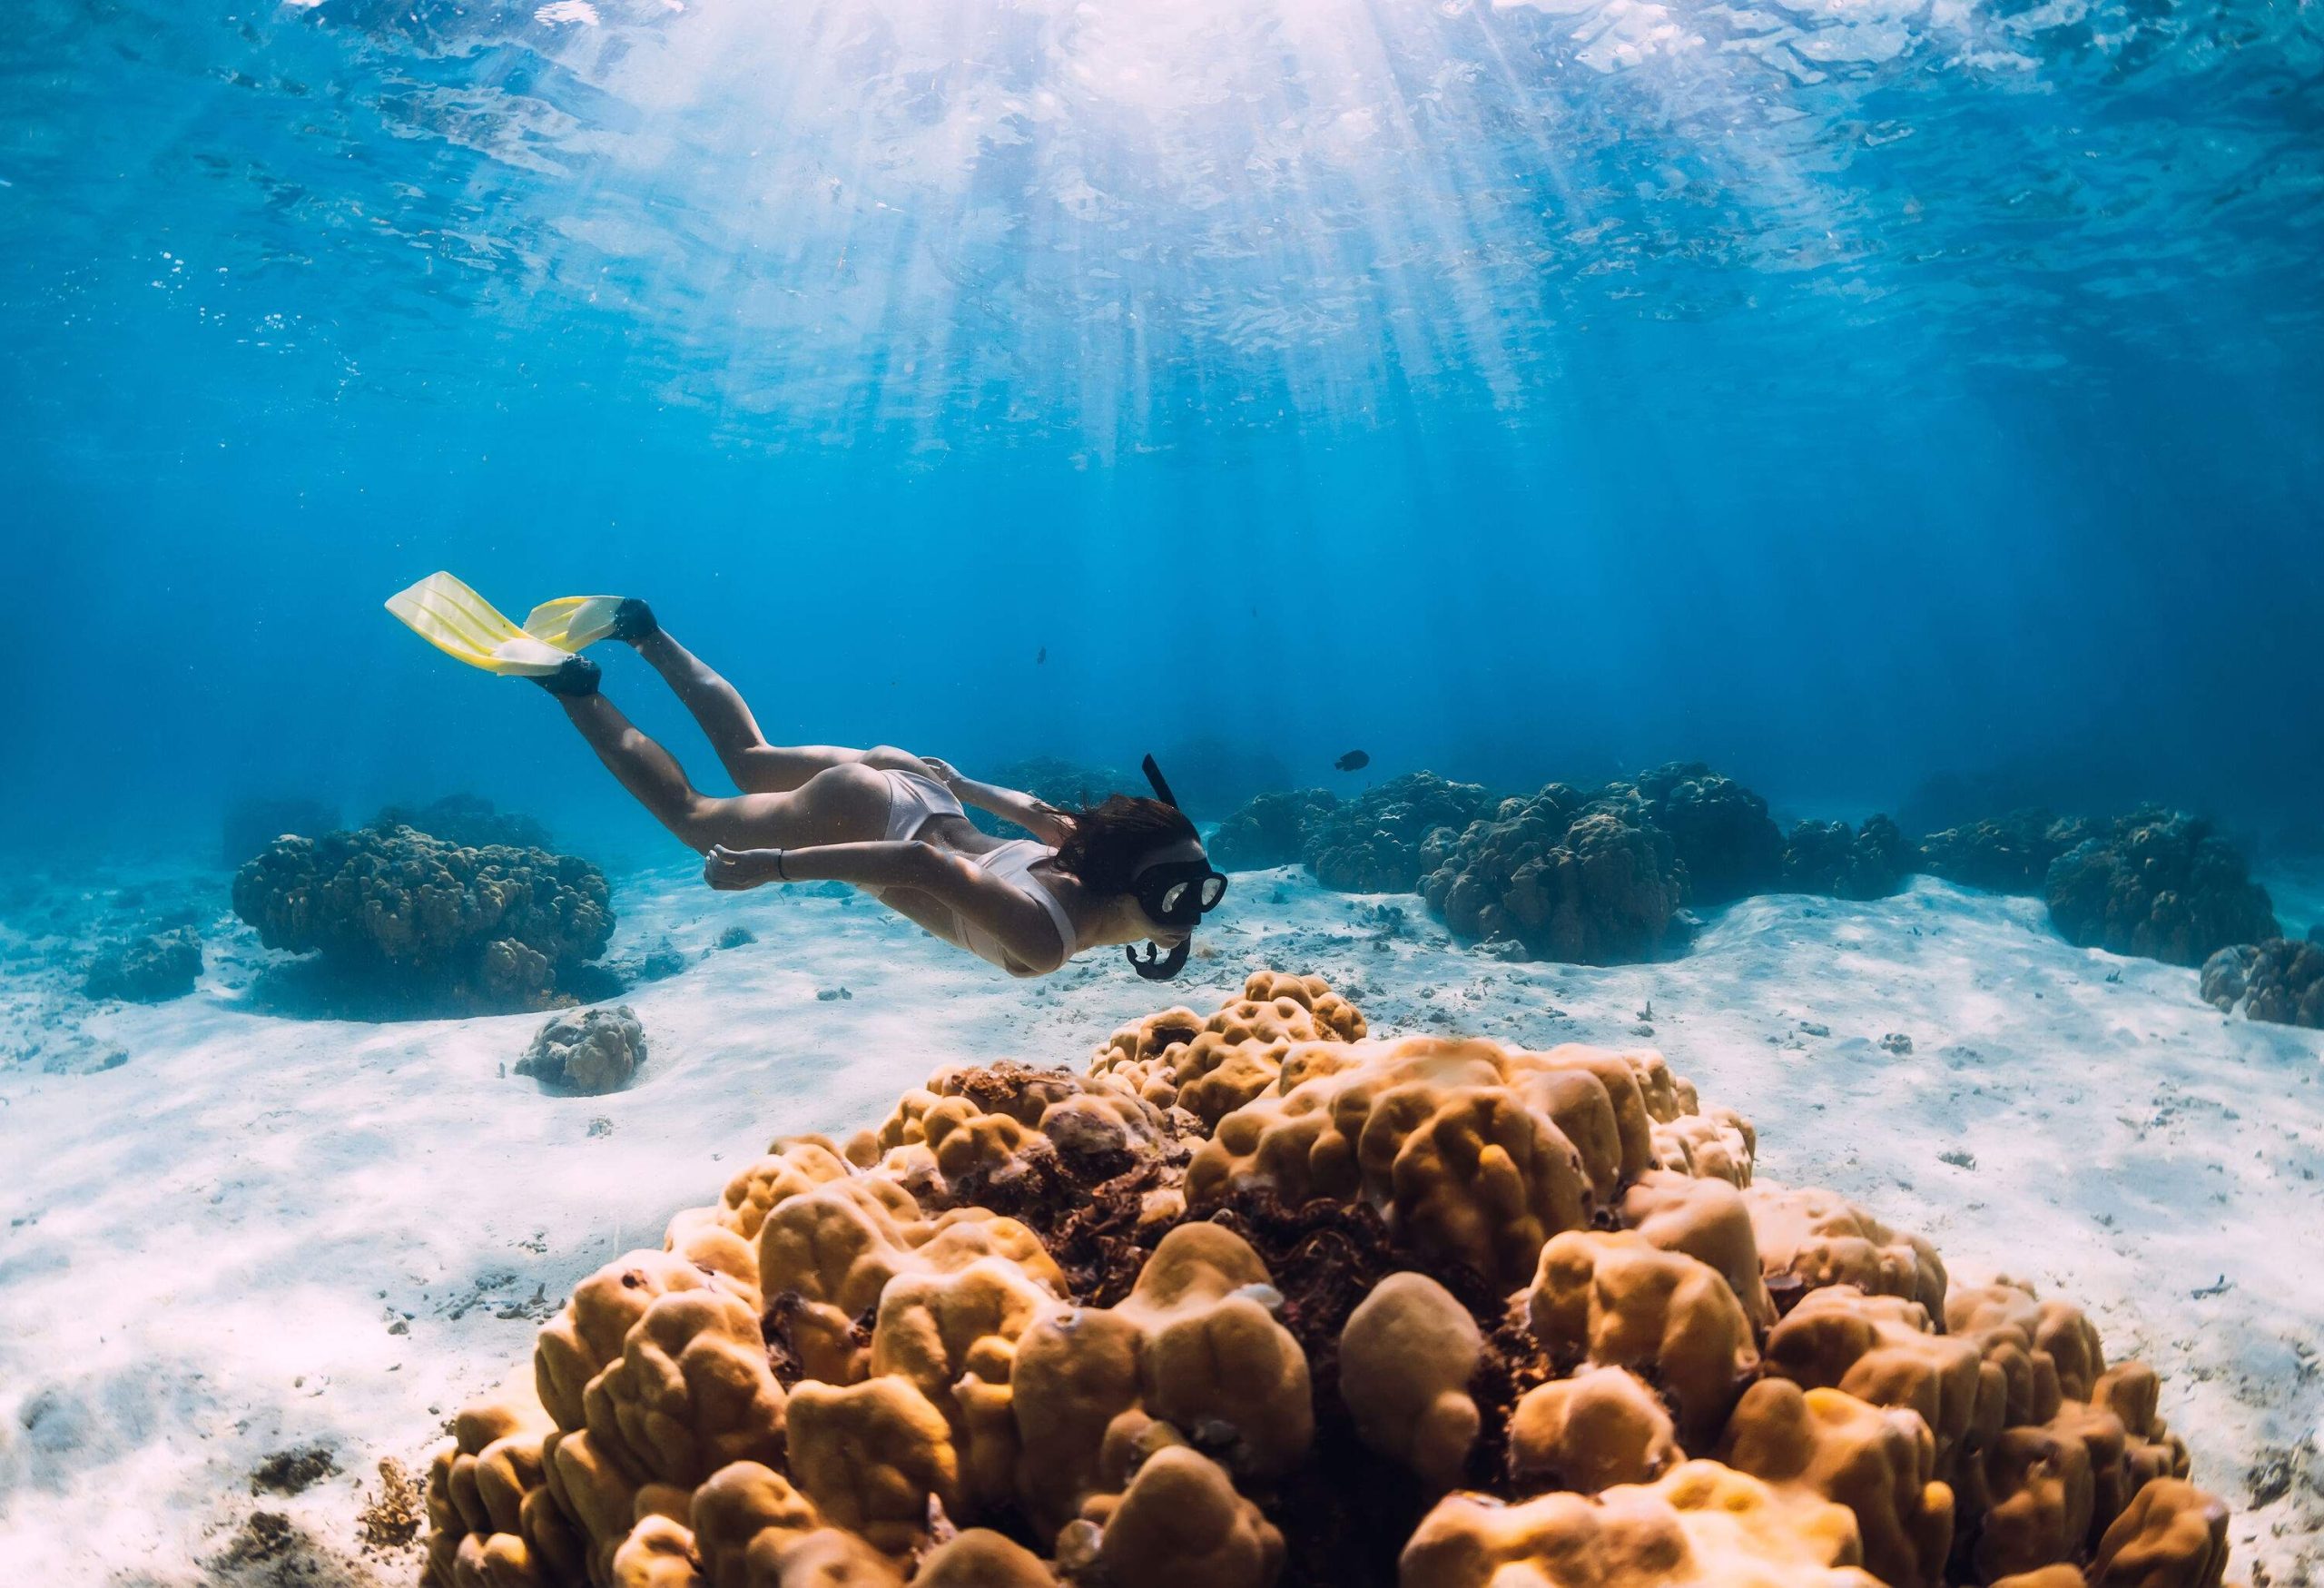 A woman diving around the beautiful corals on the seafloor as the sun rays hit the surface of the ocean.